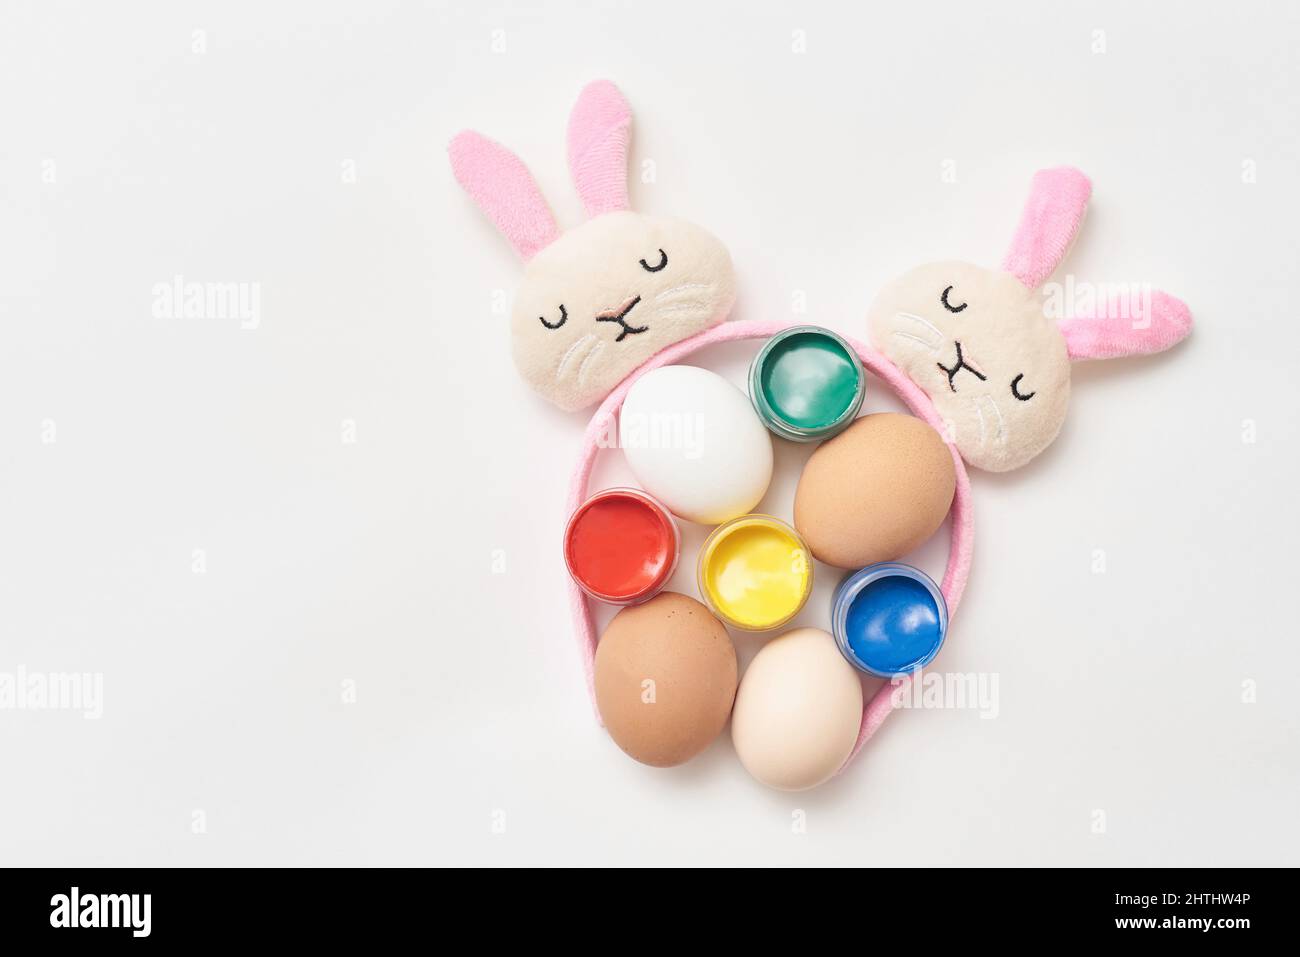 Design template for easter with eggs and paint Stock Photo